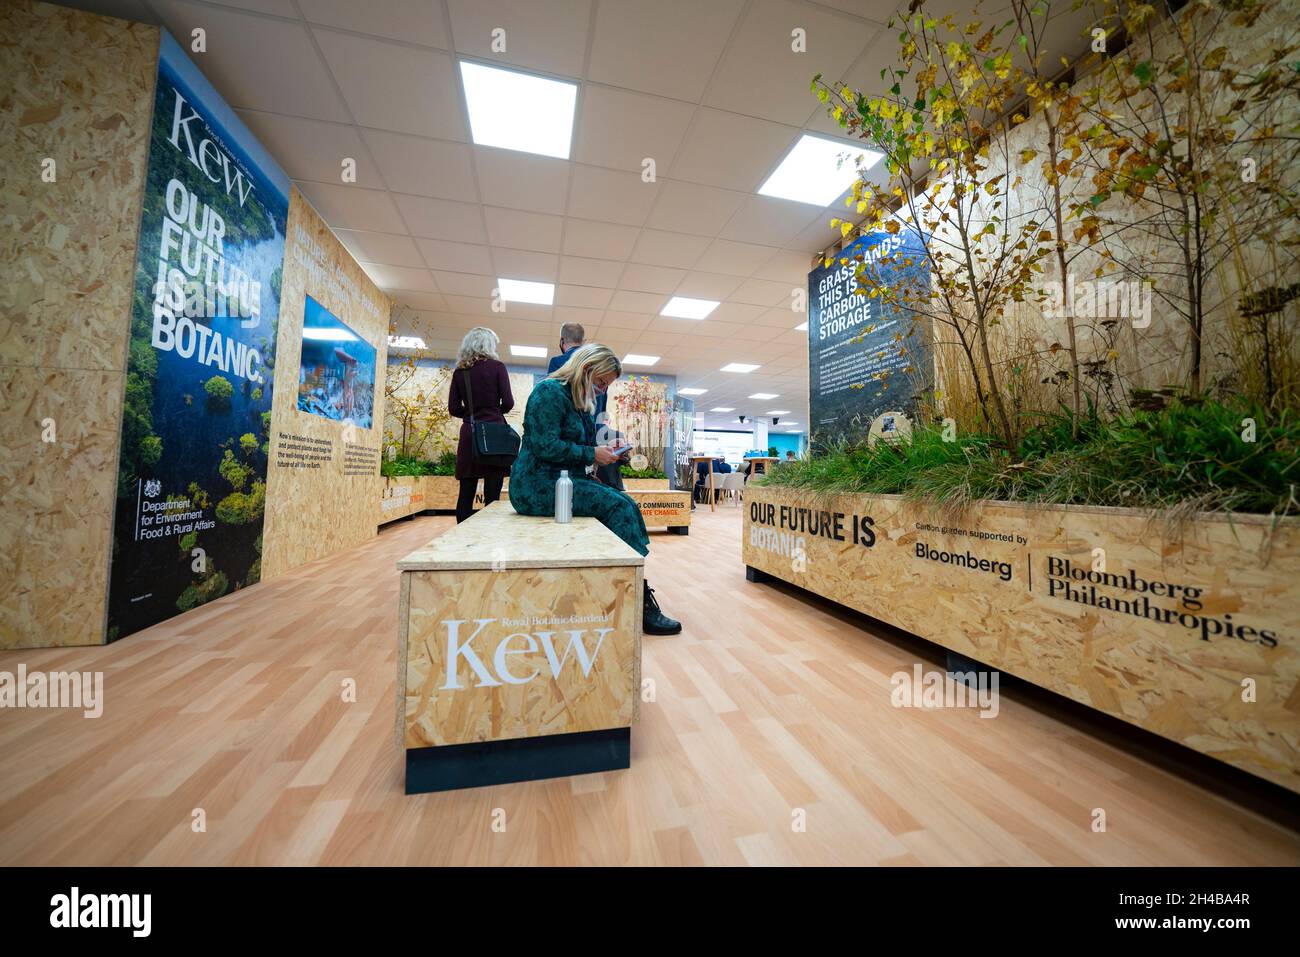 Glasgow, Scotland, UK. 1st November 2021. Images from Monday at the UN climate change conference in Glasgow. Pic; The Royal Botanical Gardens Kew pavilion.  Iain Masterton/Alamy Live News. Stock Photo